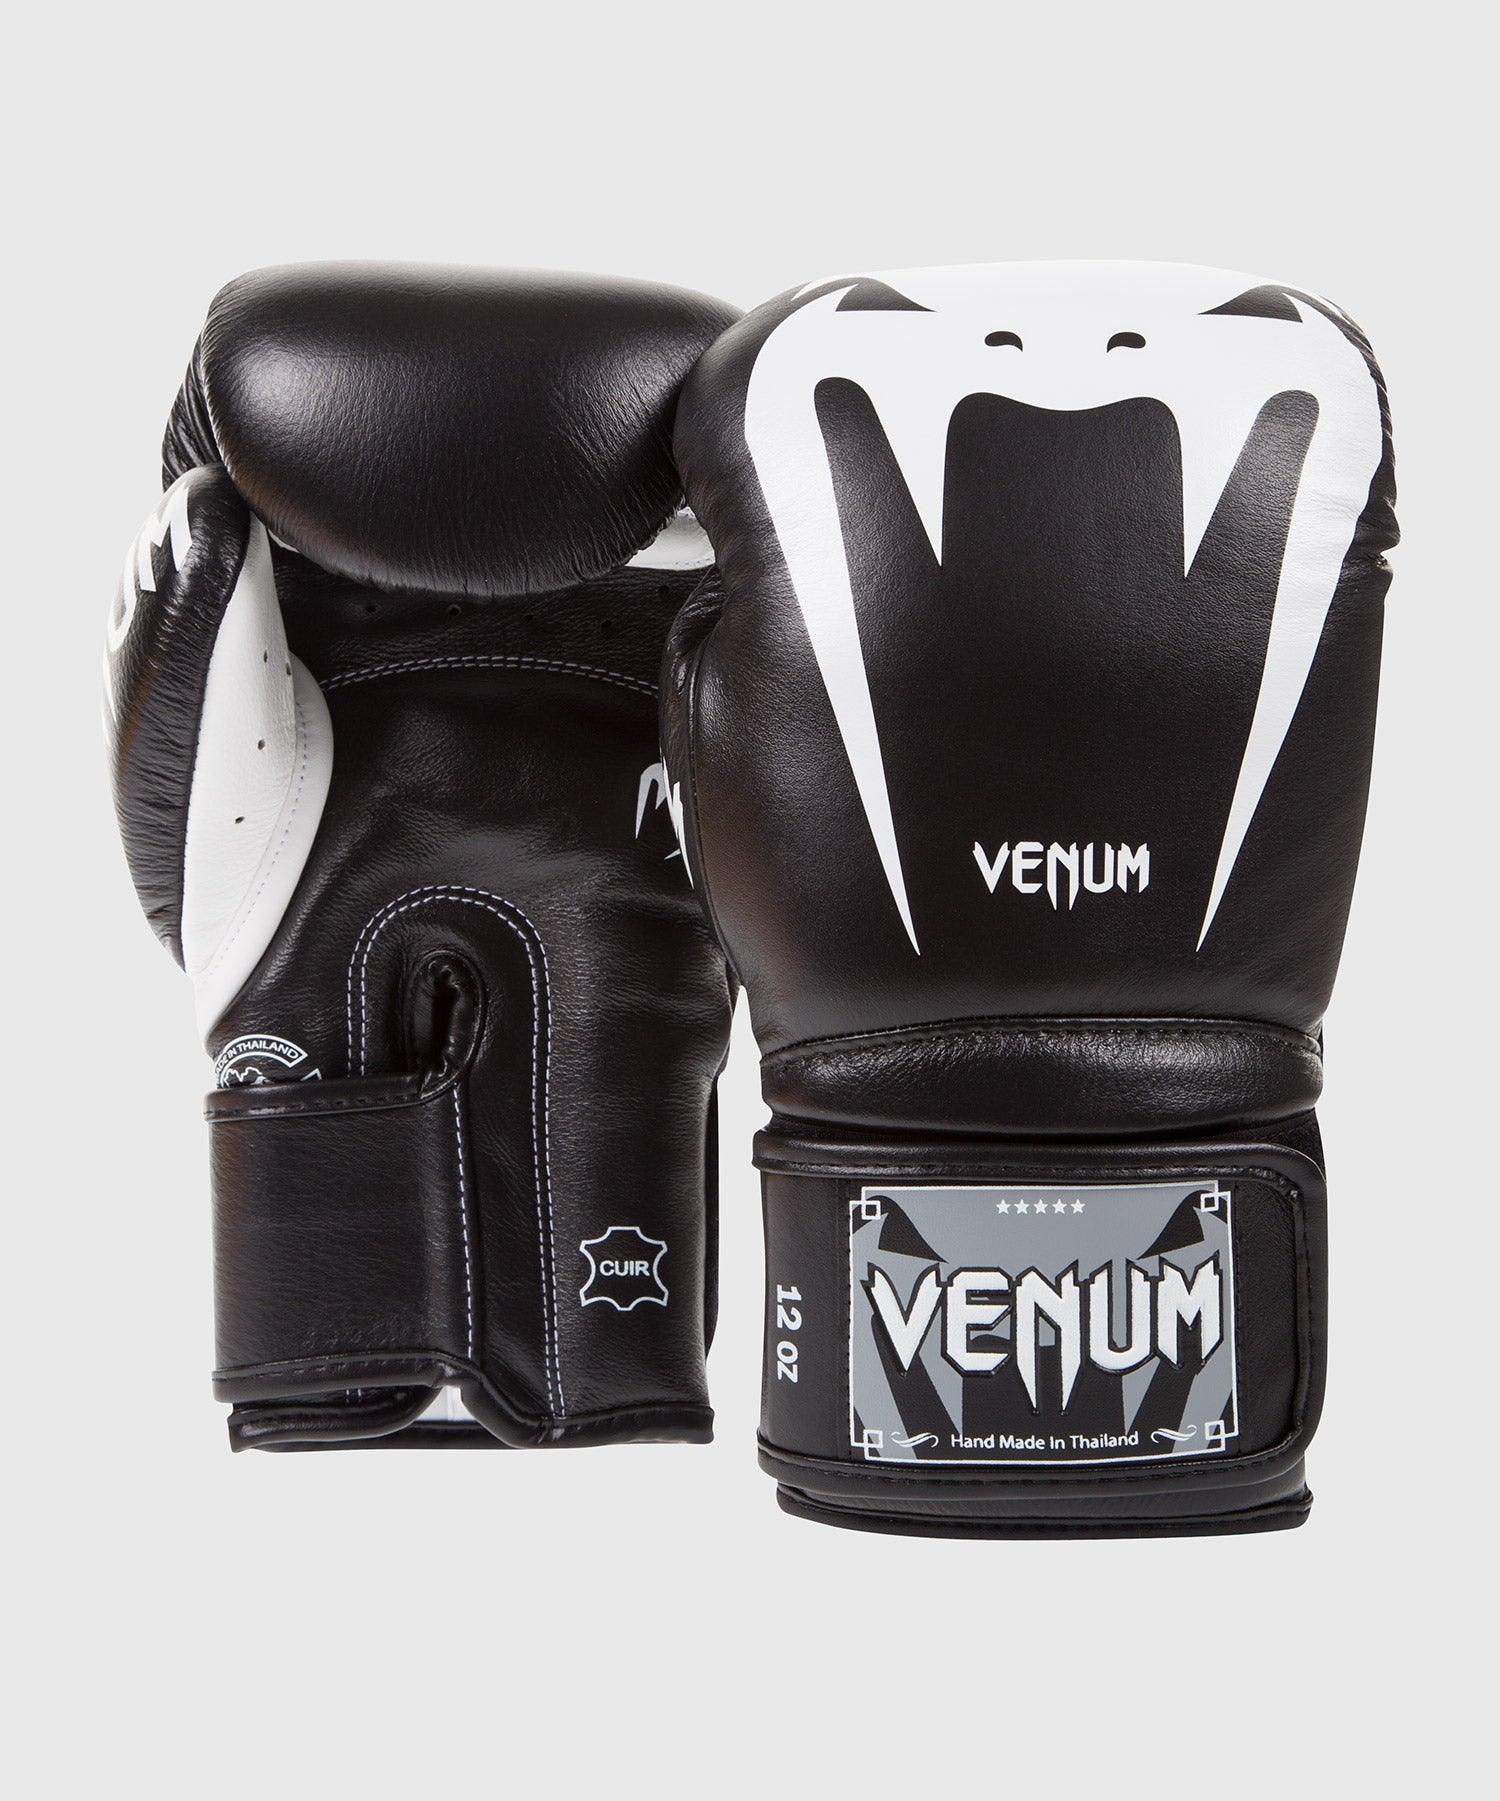 Venum Giant 3.0 Boxing Gloves - Nappa Leather - Black Picture 2